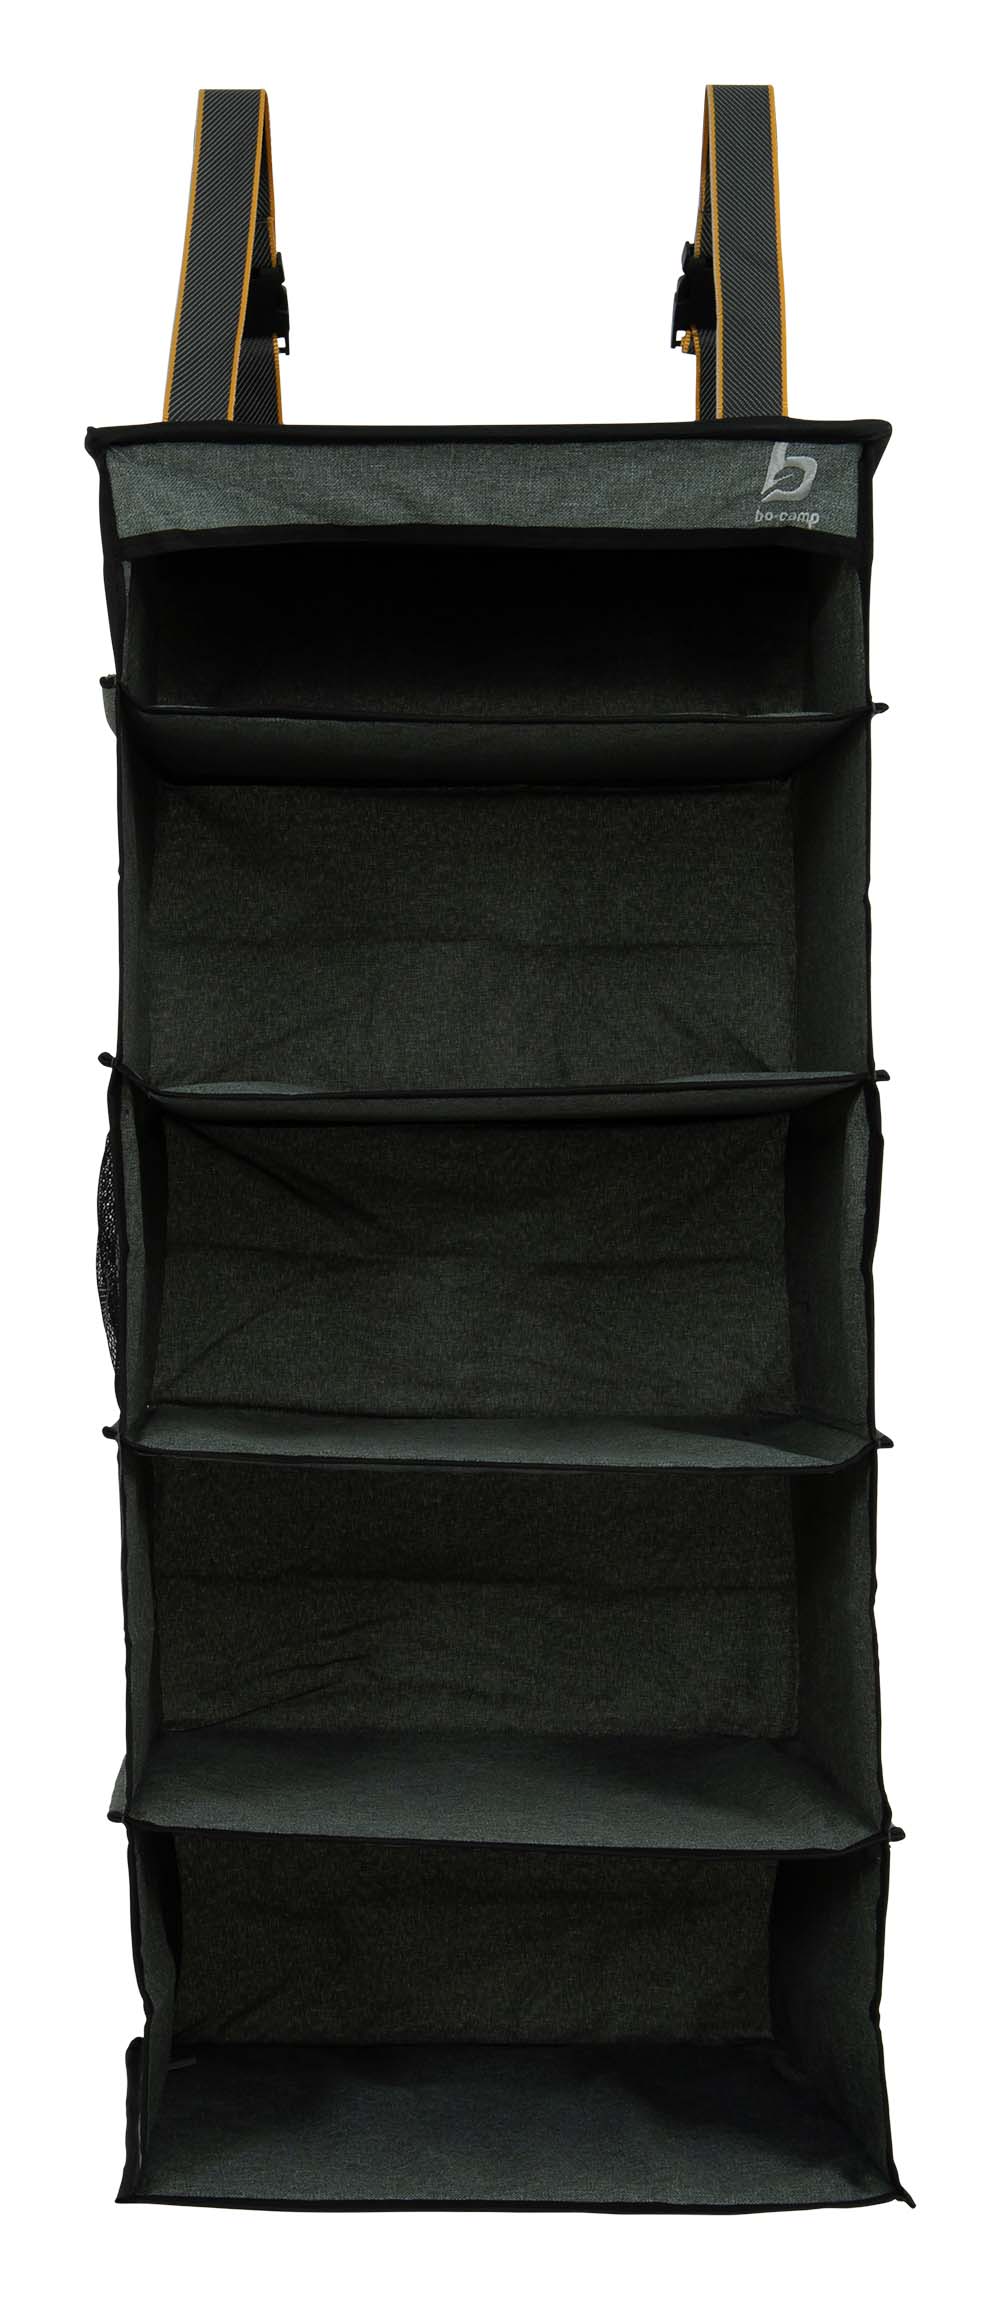 Bo-Camp - Industrial collection - Organizer - Westlawn - 5 Compartments detail 3